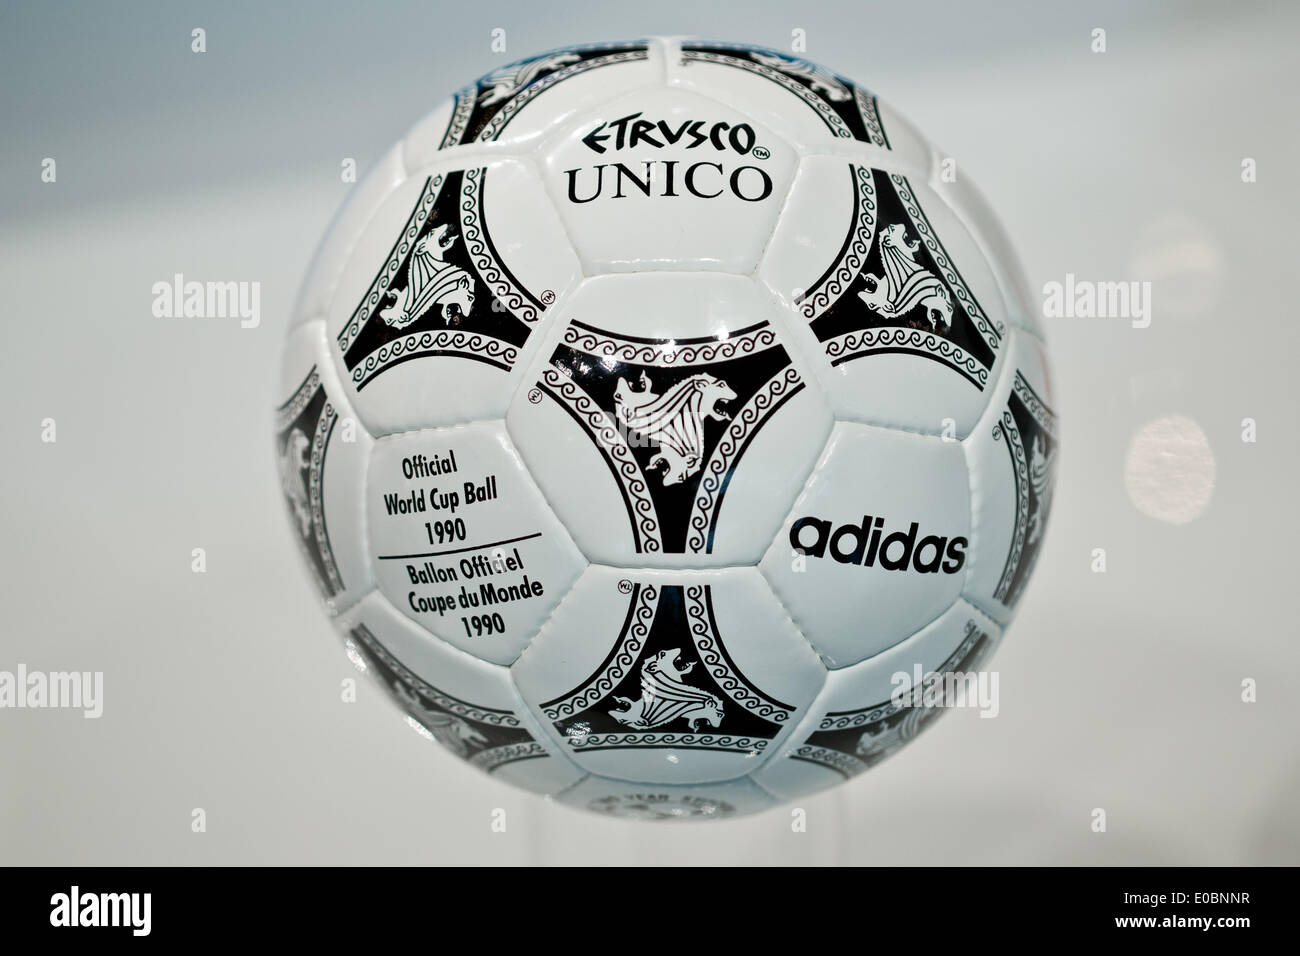 The Adidas Etrusco High Resolution Stock Photography and Images - Alamy